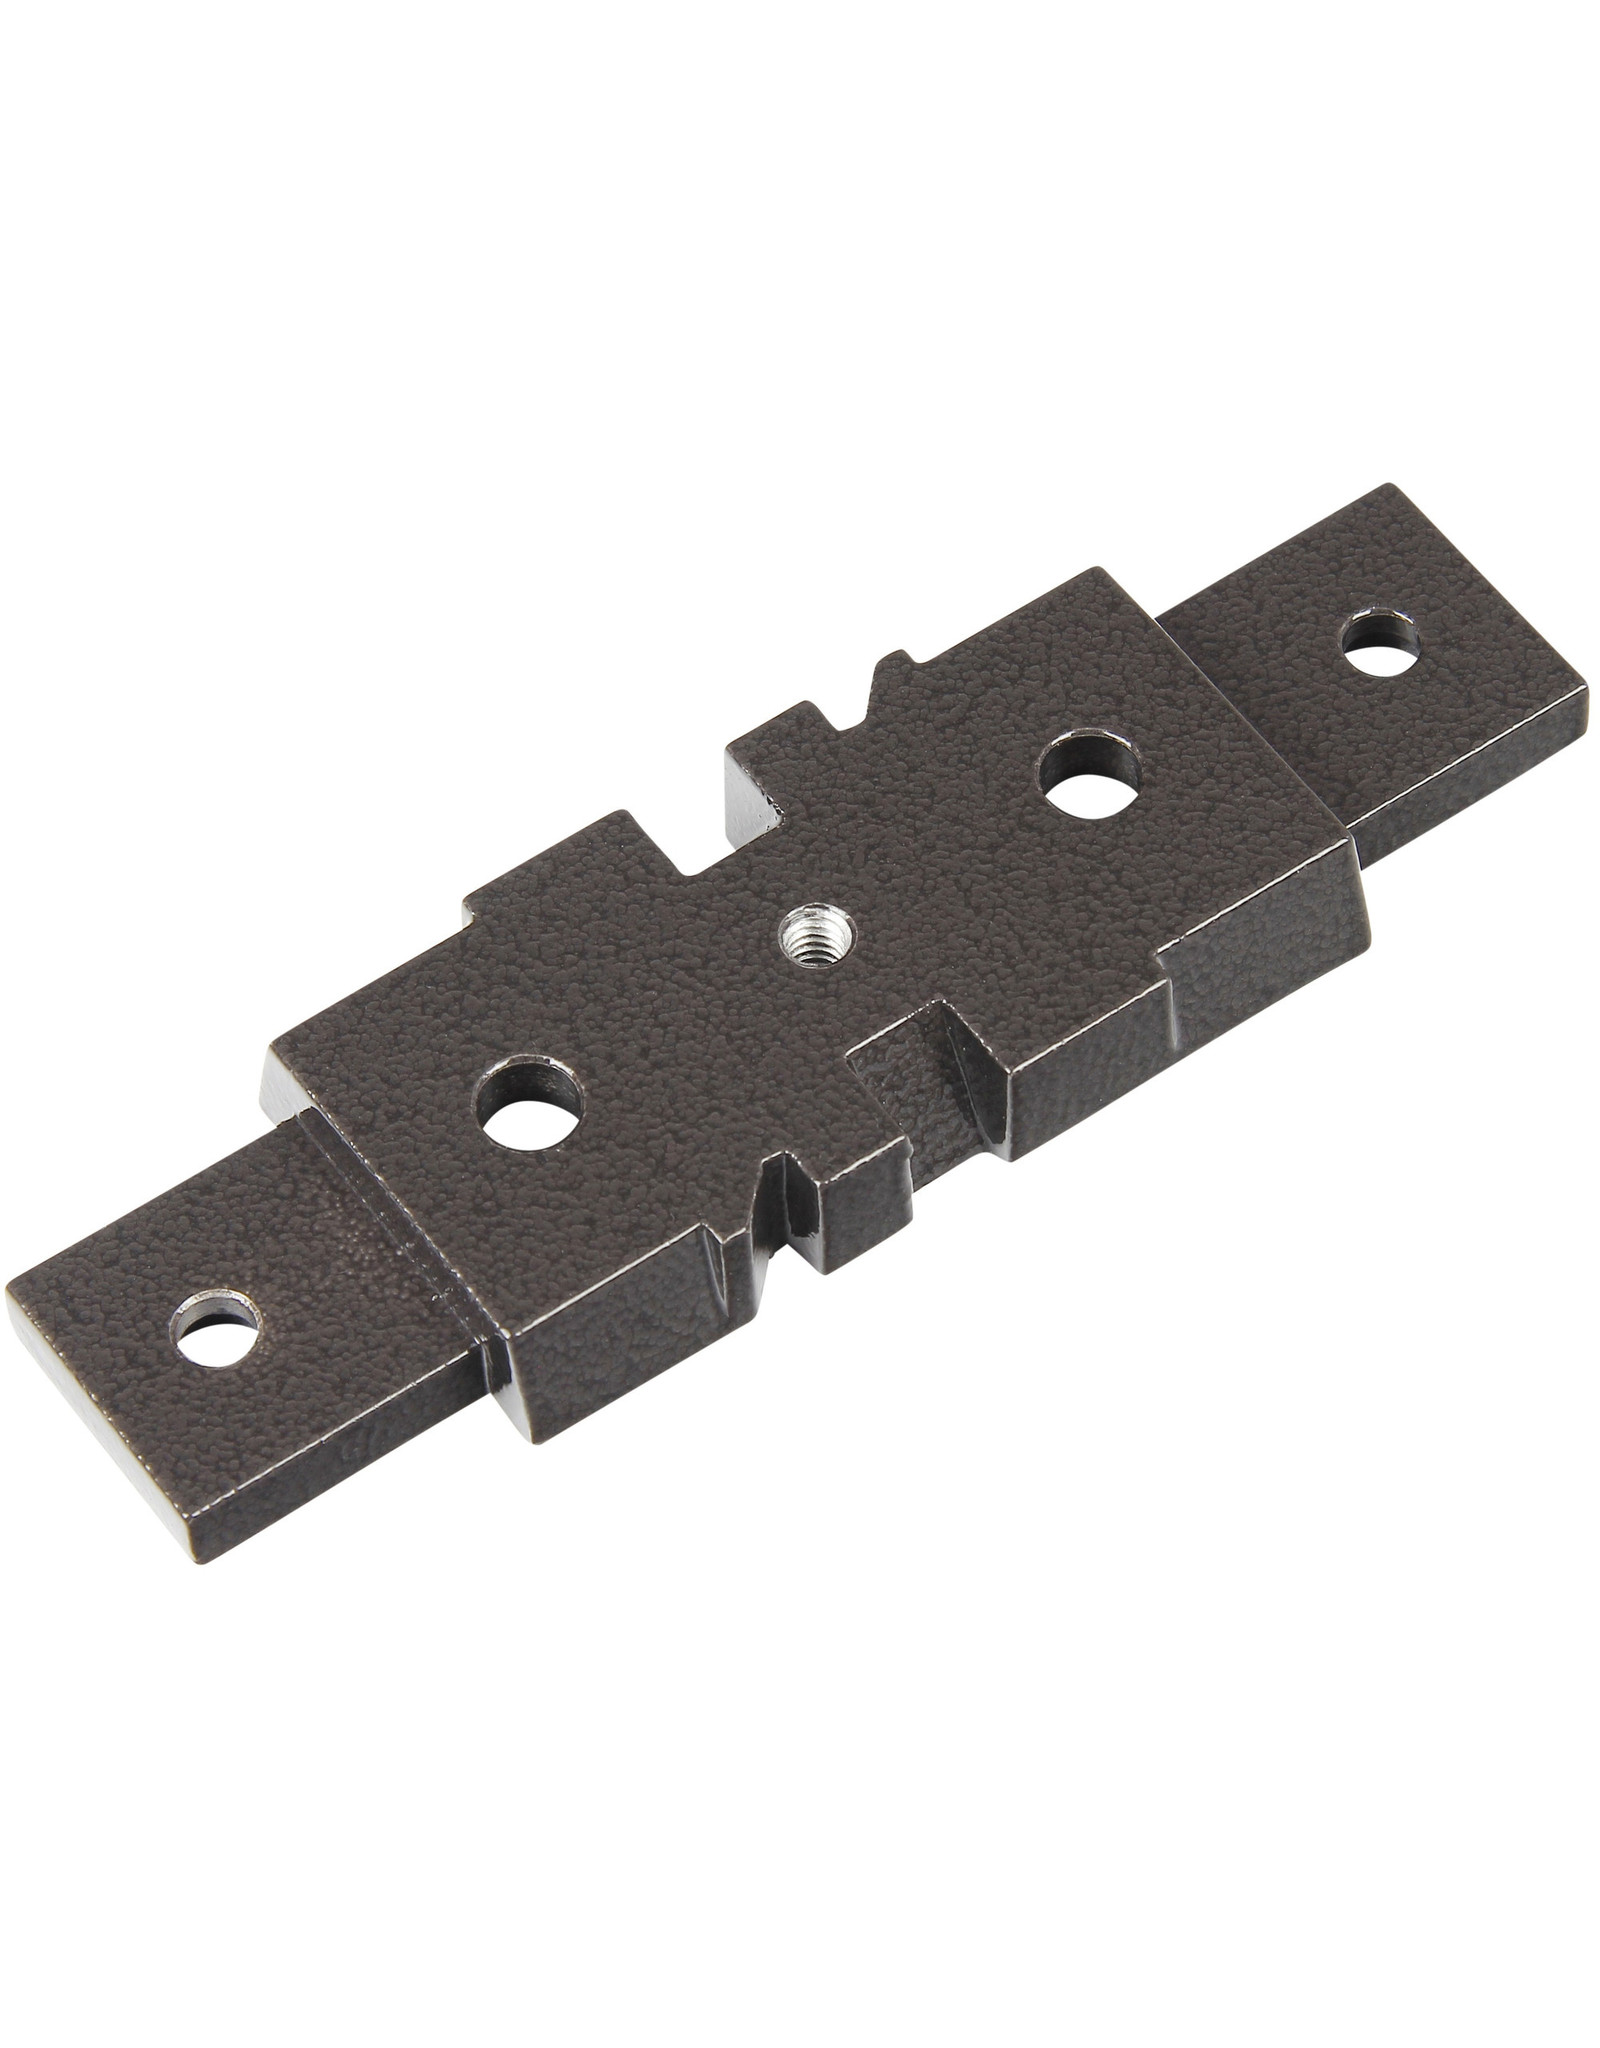 Orion Dovetail Mounting Plate